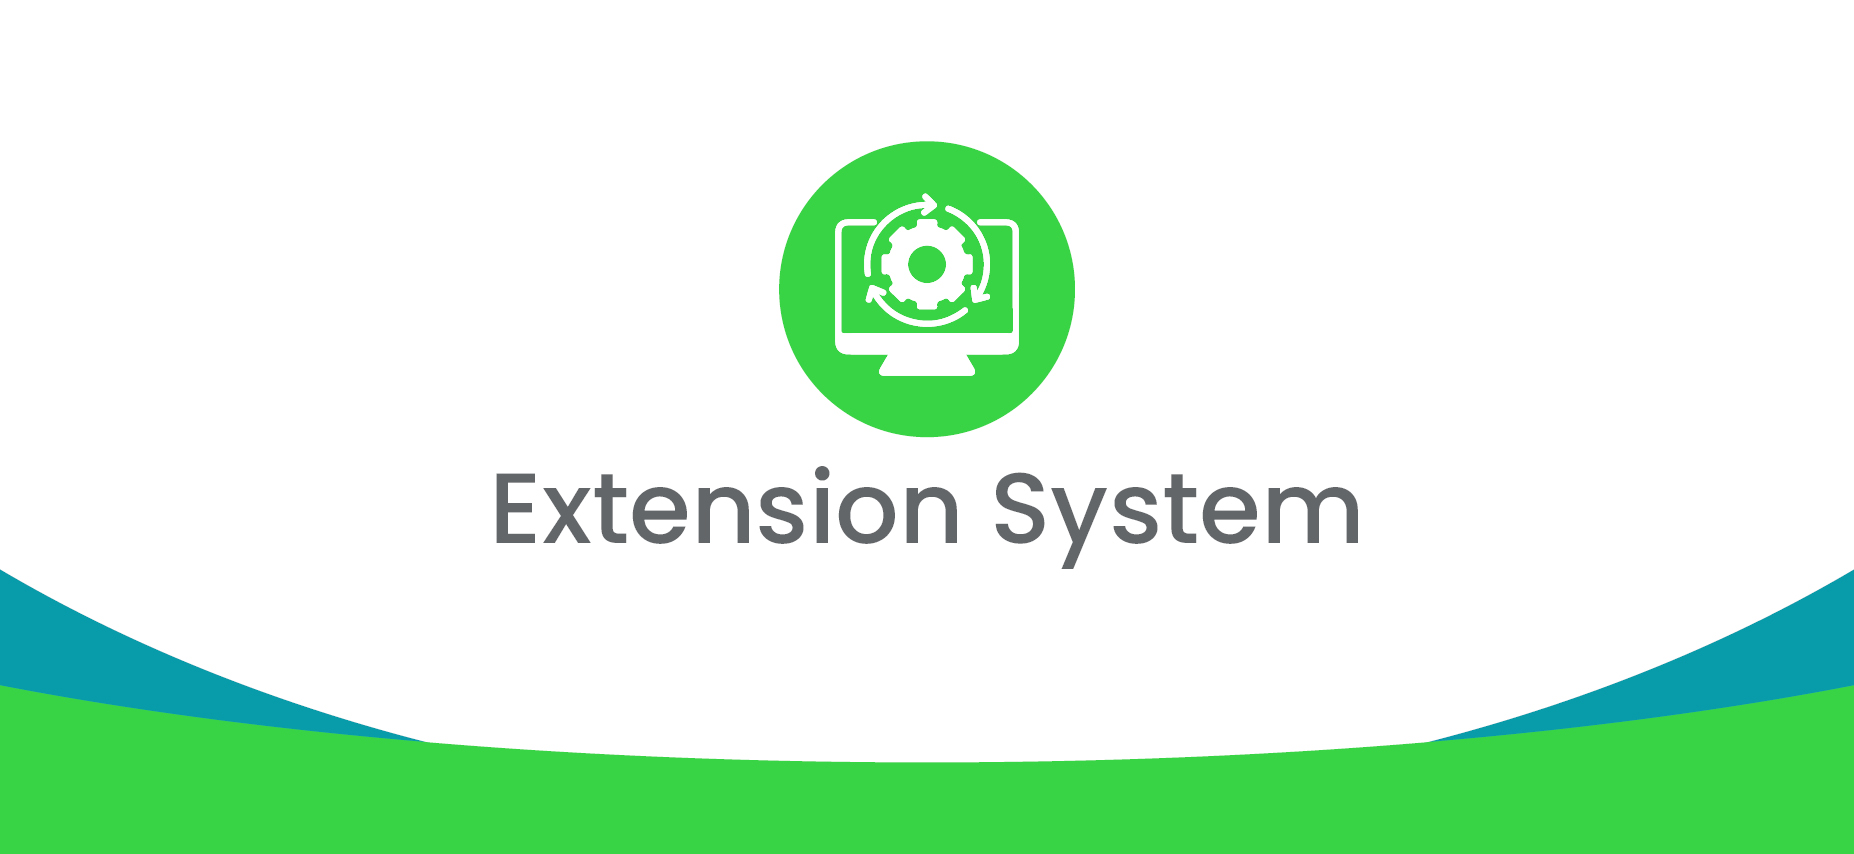 Extension System